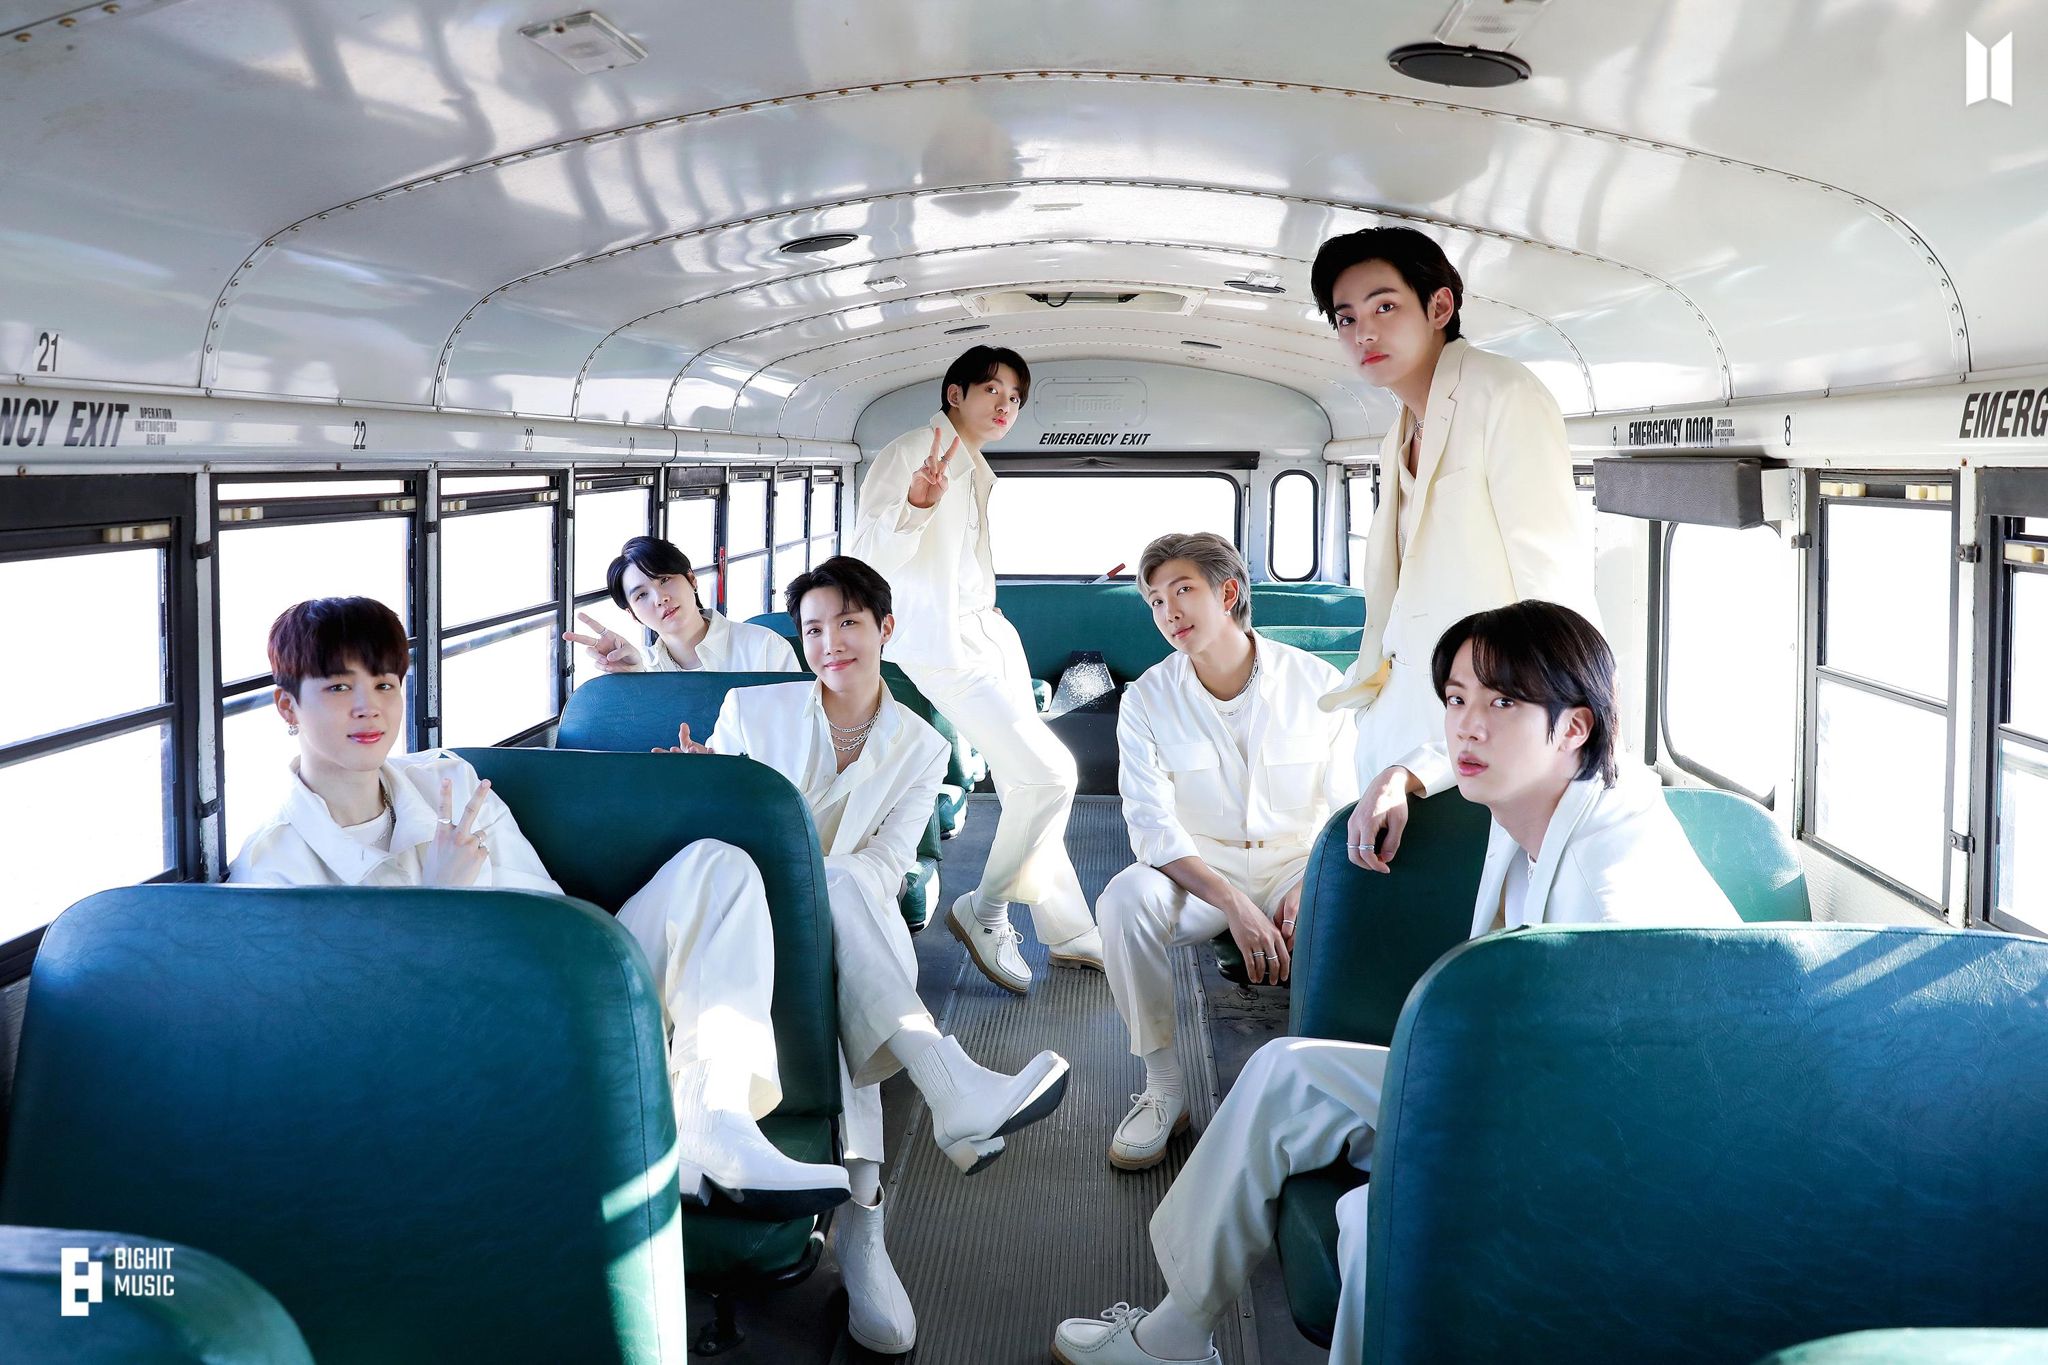 BTS Yet To Come (The Most Beautiful Moment) MV Photo Sketch